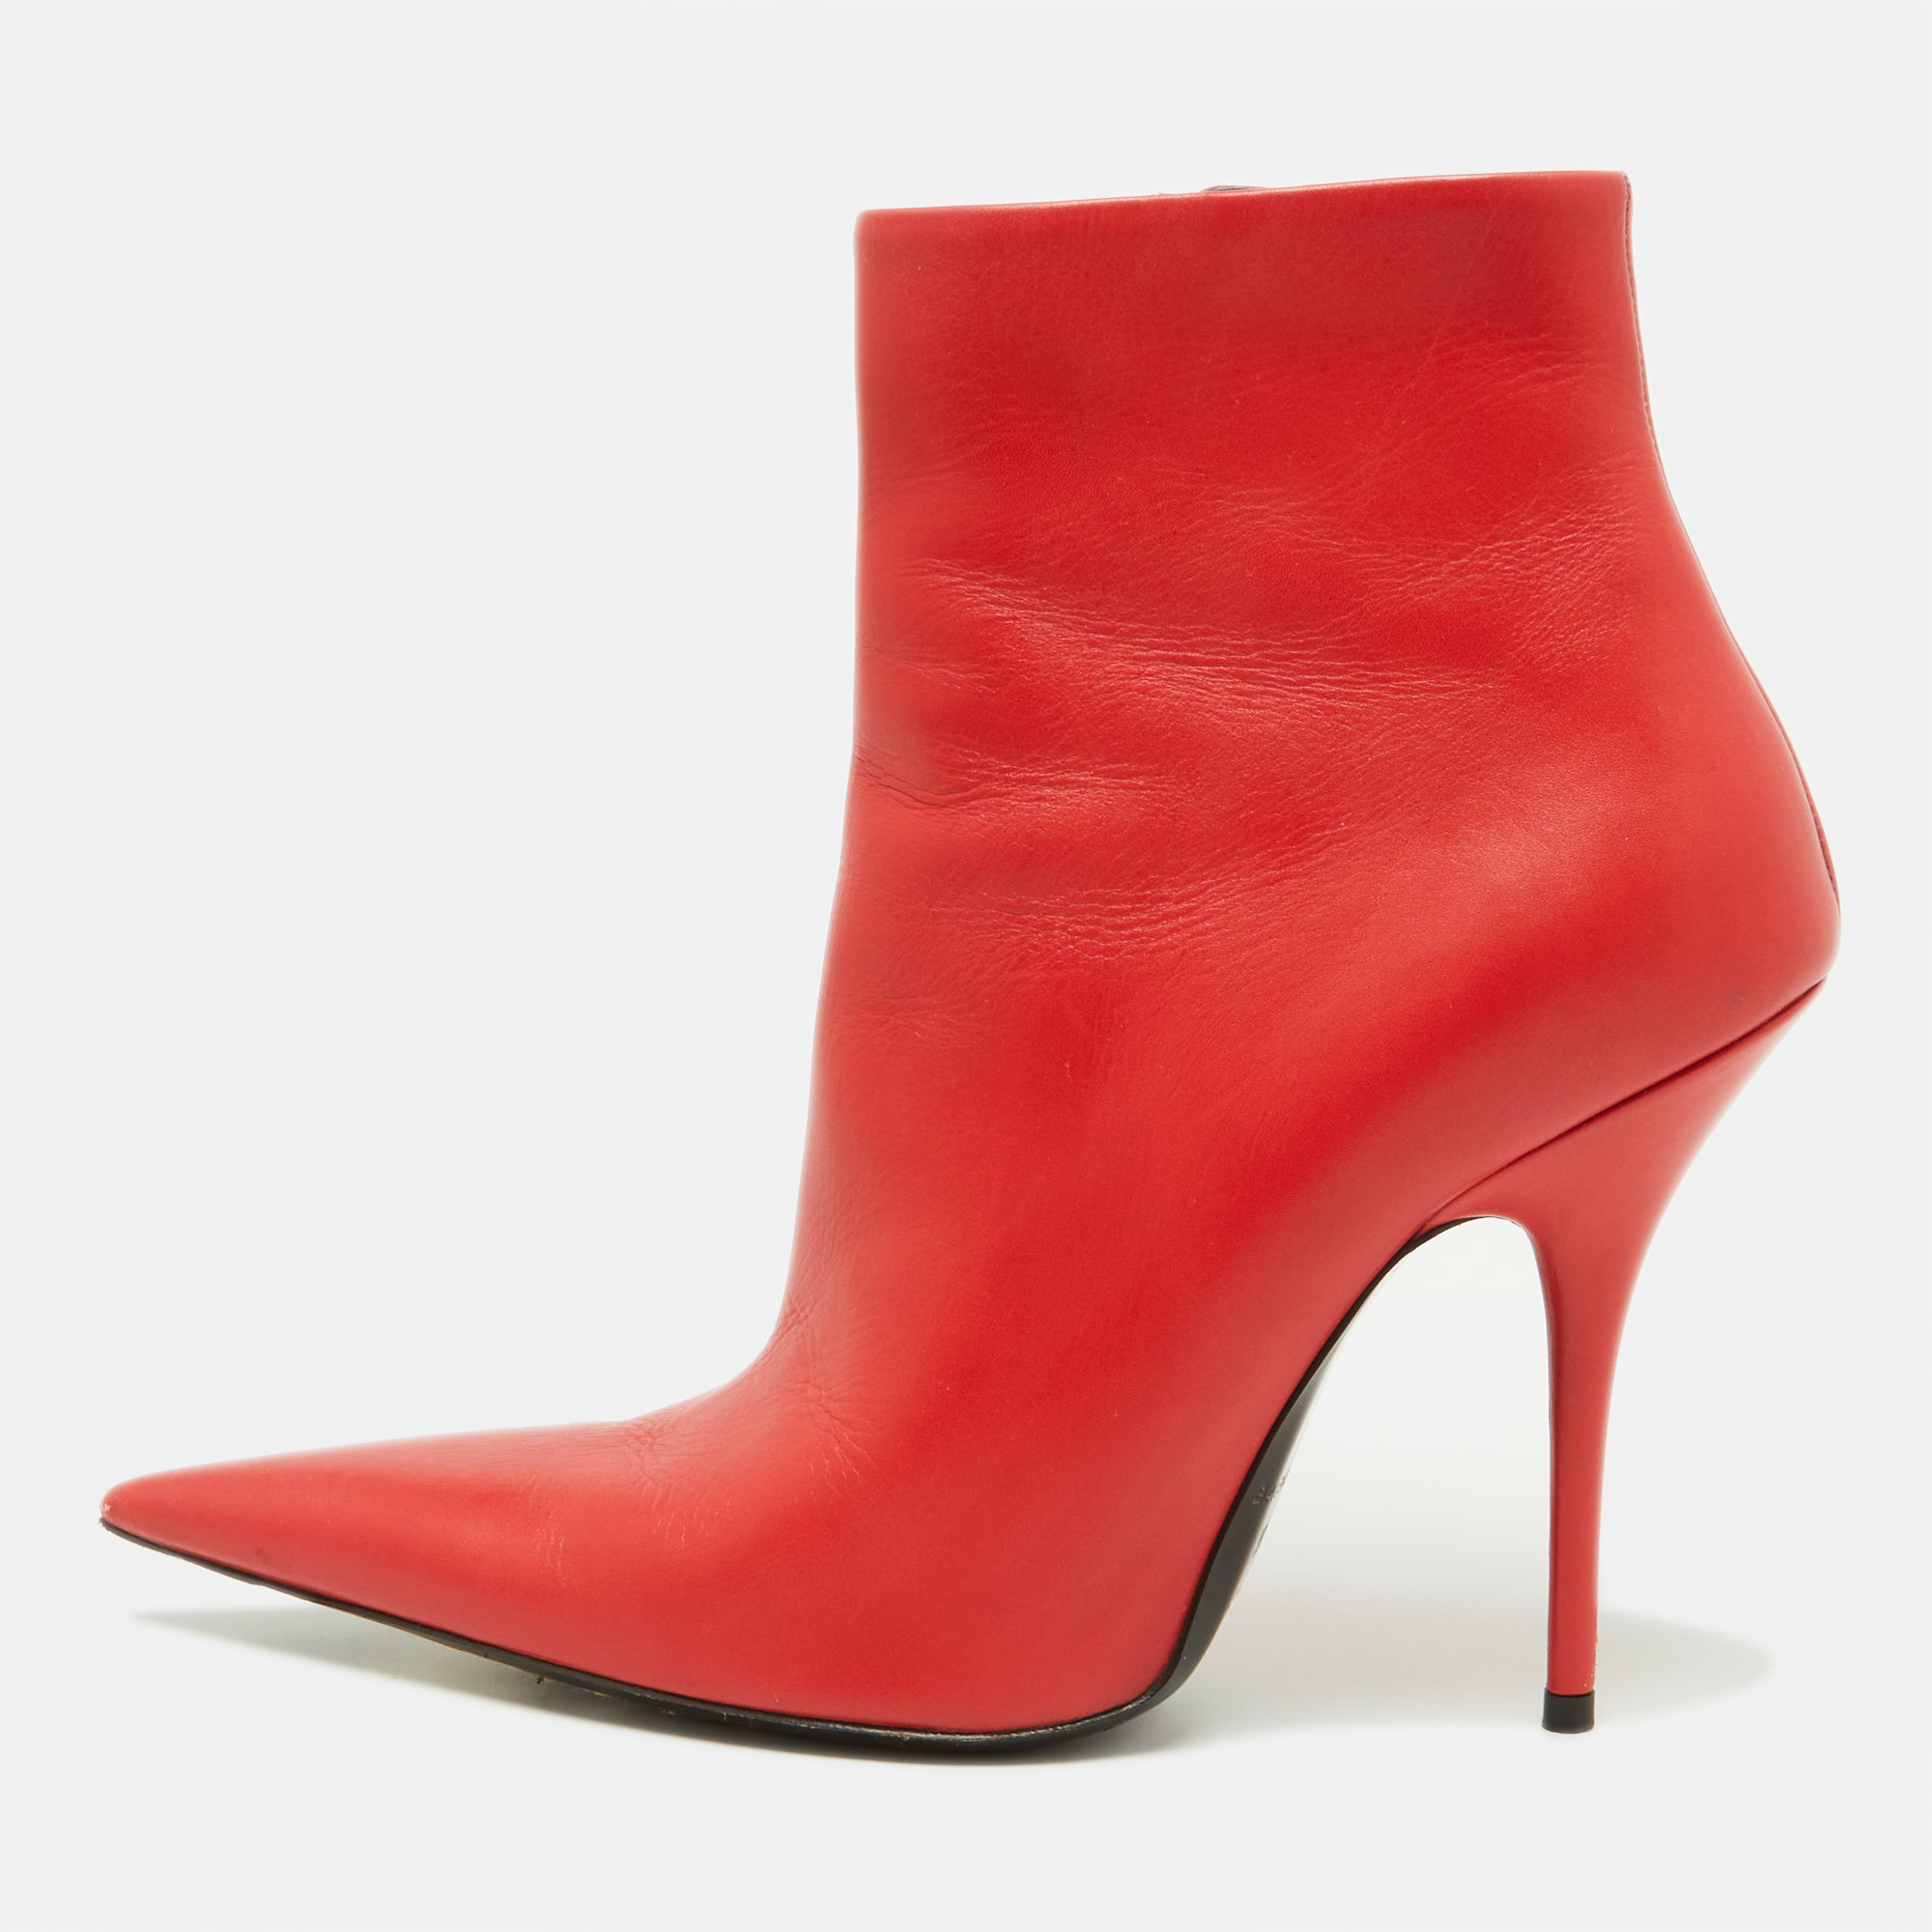 Balenciaga red leather knife ankle booties size 38.5